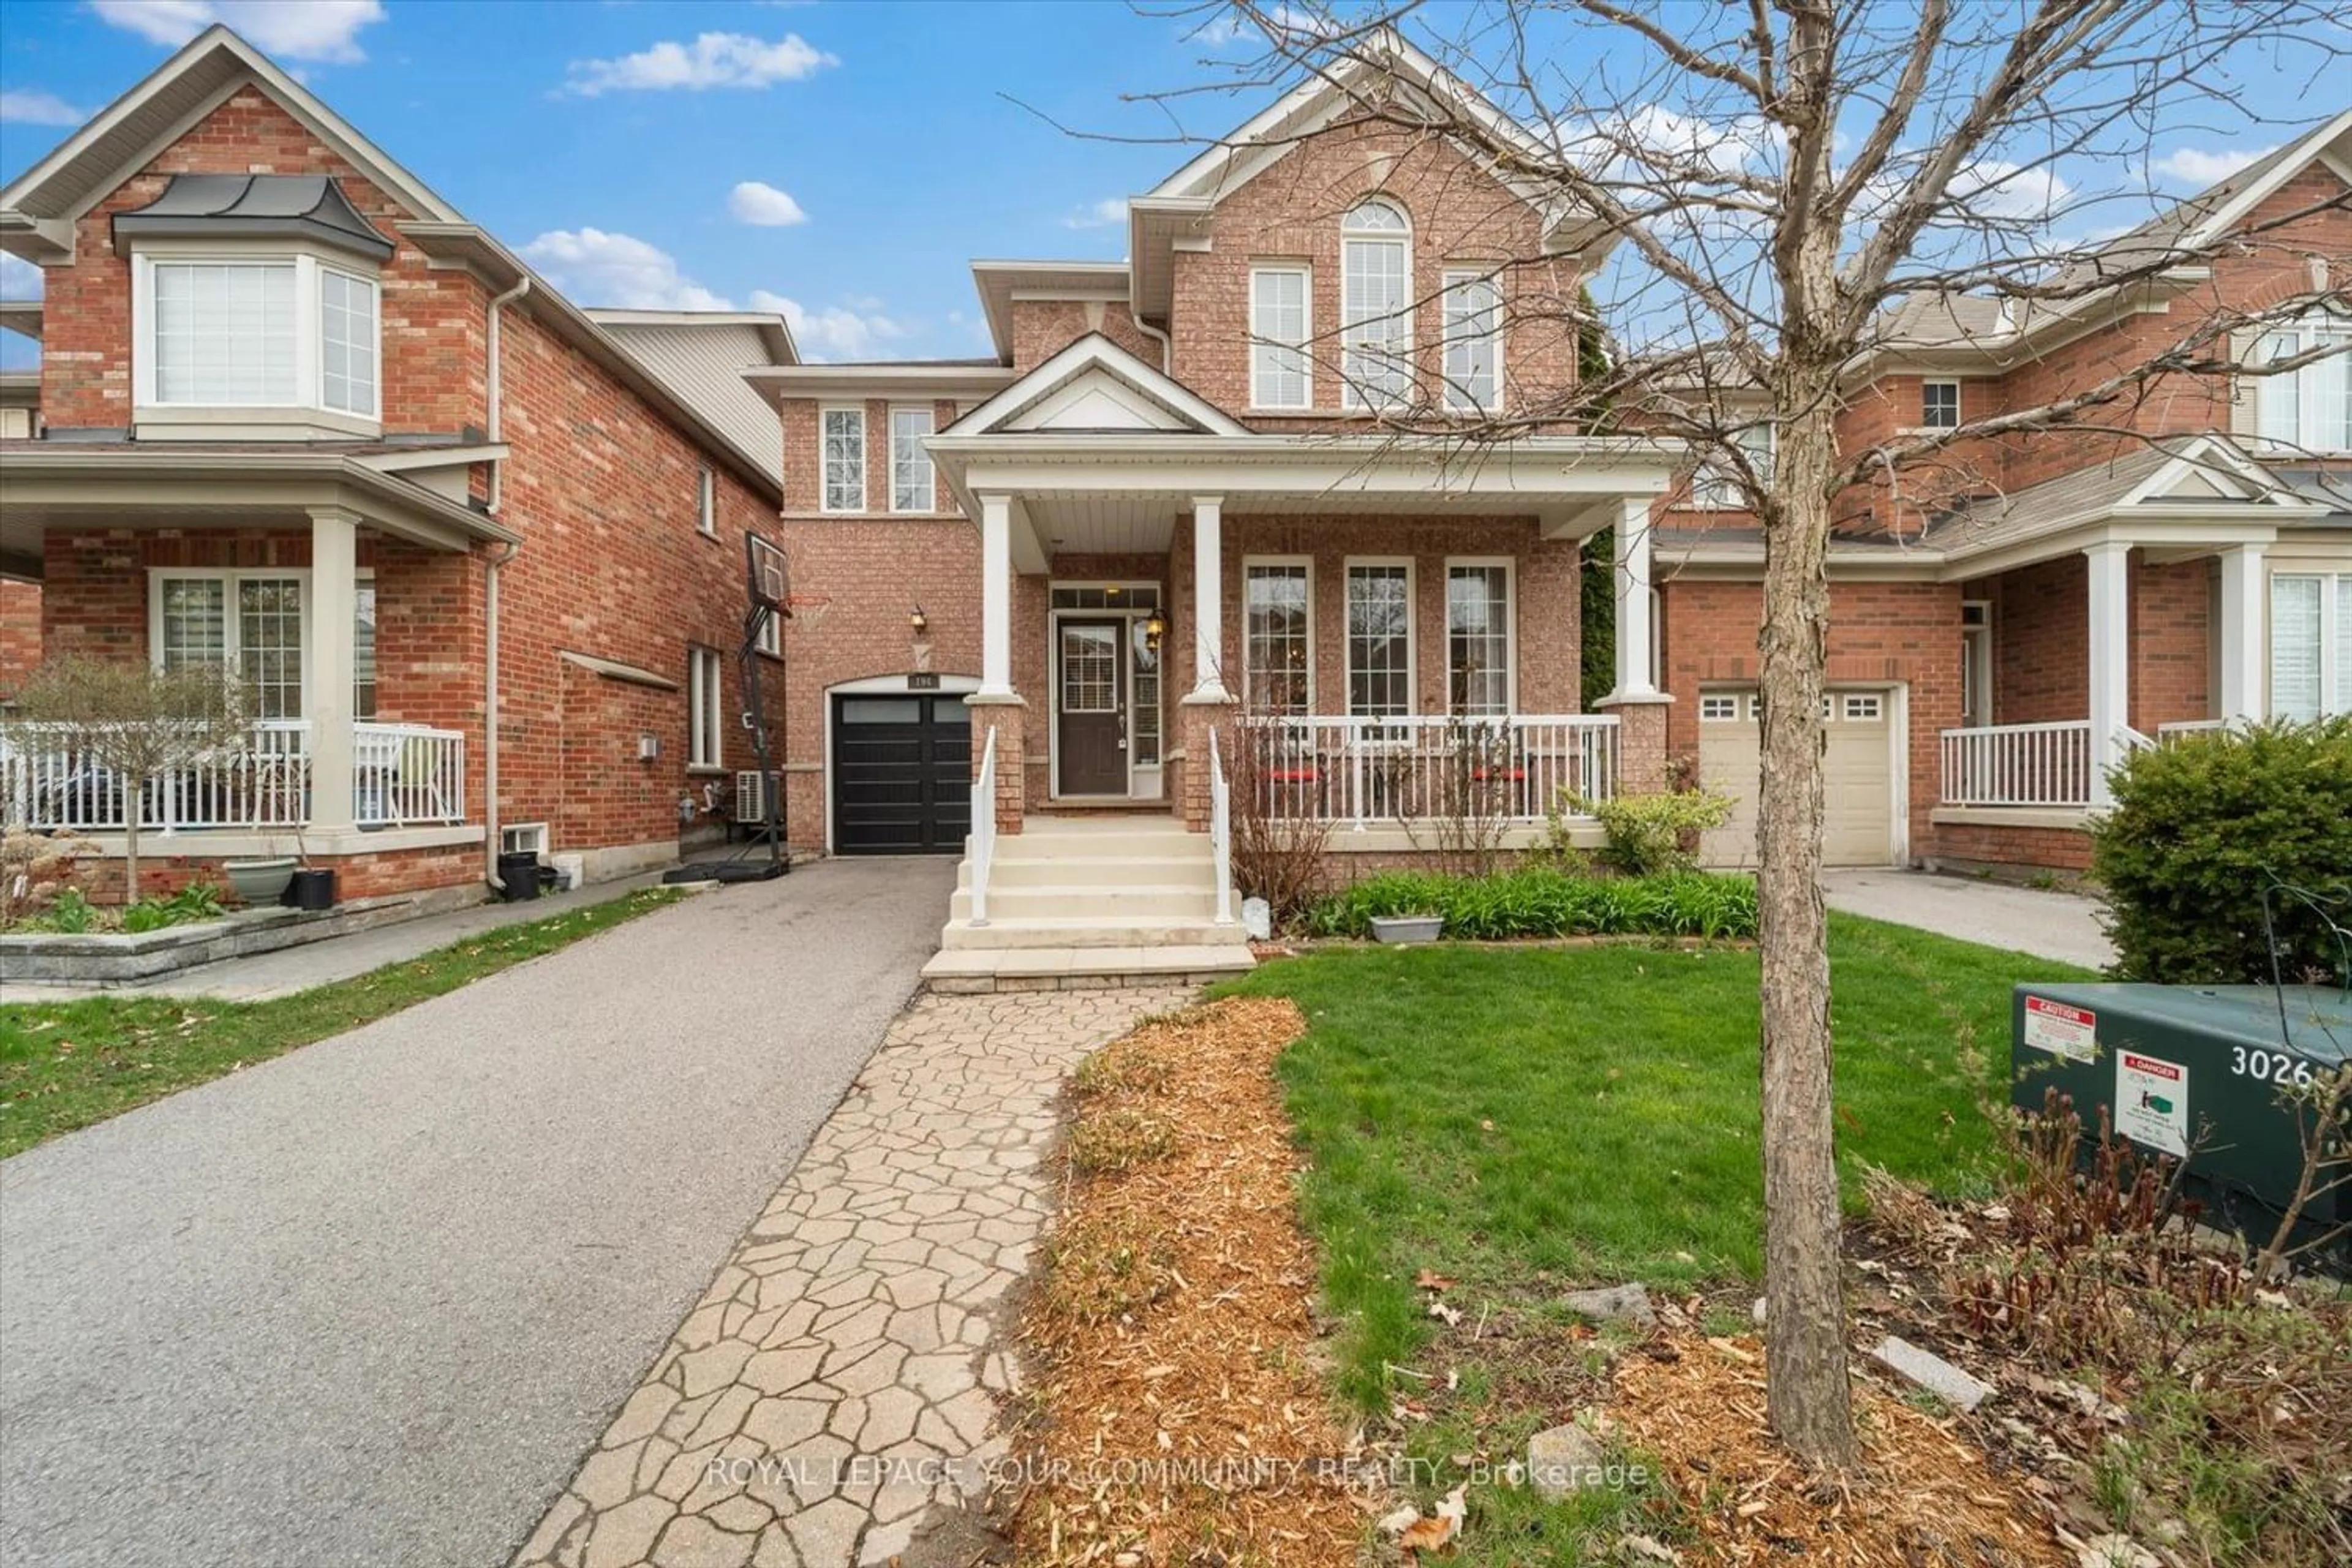 Home with brick exterior material for 194 Gail Park Cres, Newmarket Ontario L3X 3C2